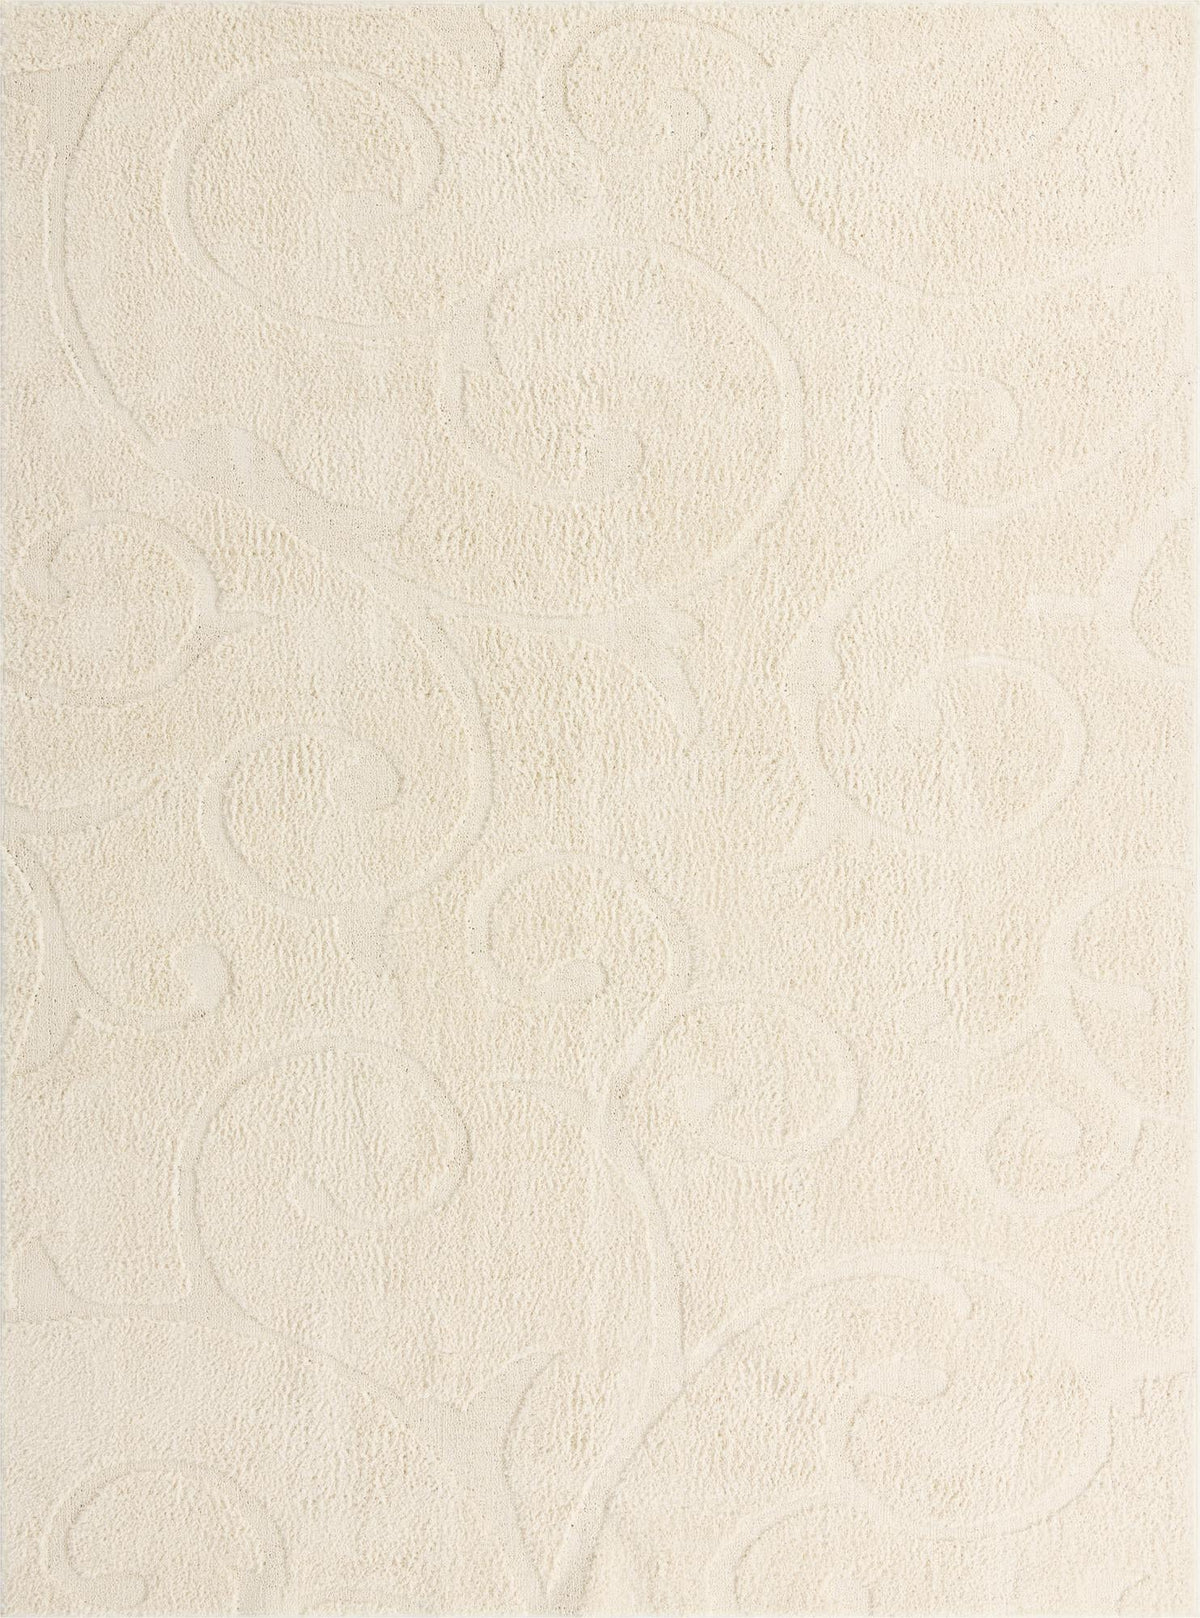 Botanical Bliss Shag Collection Area Rug - Blossomdale Rectangle Ivory Main